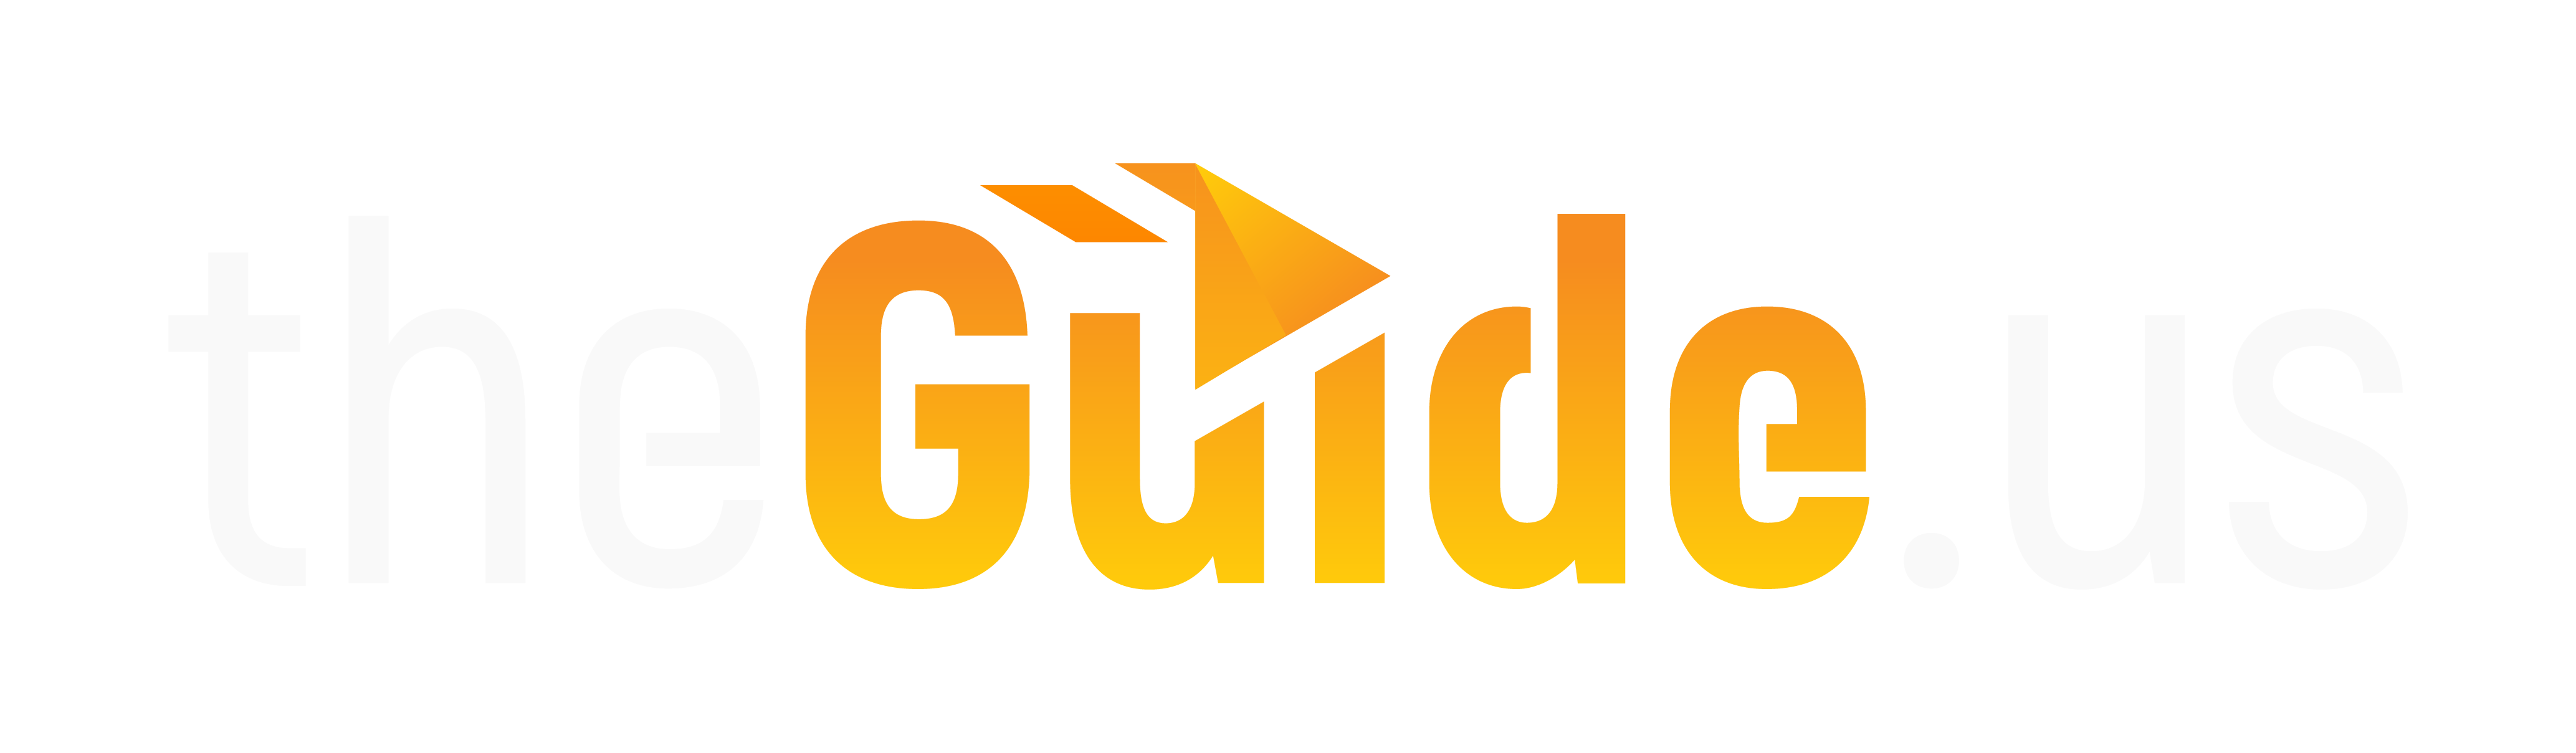 TheGuide.us